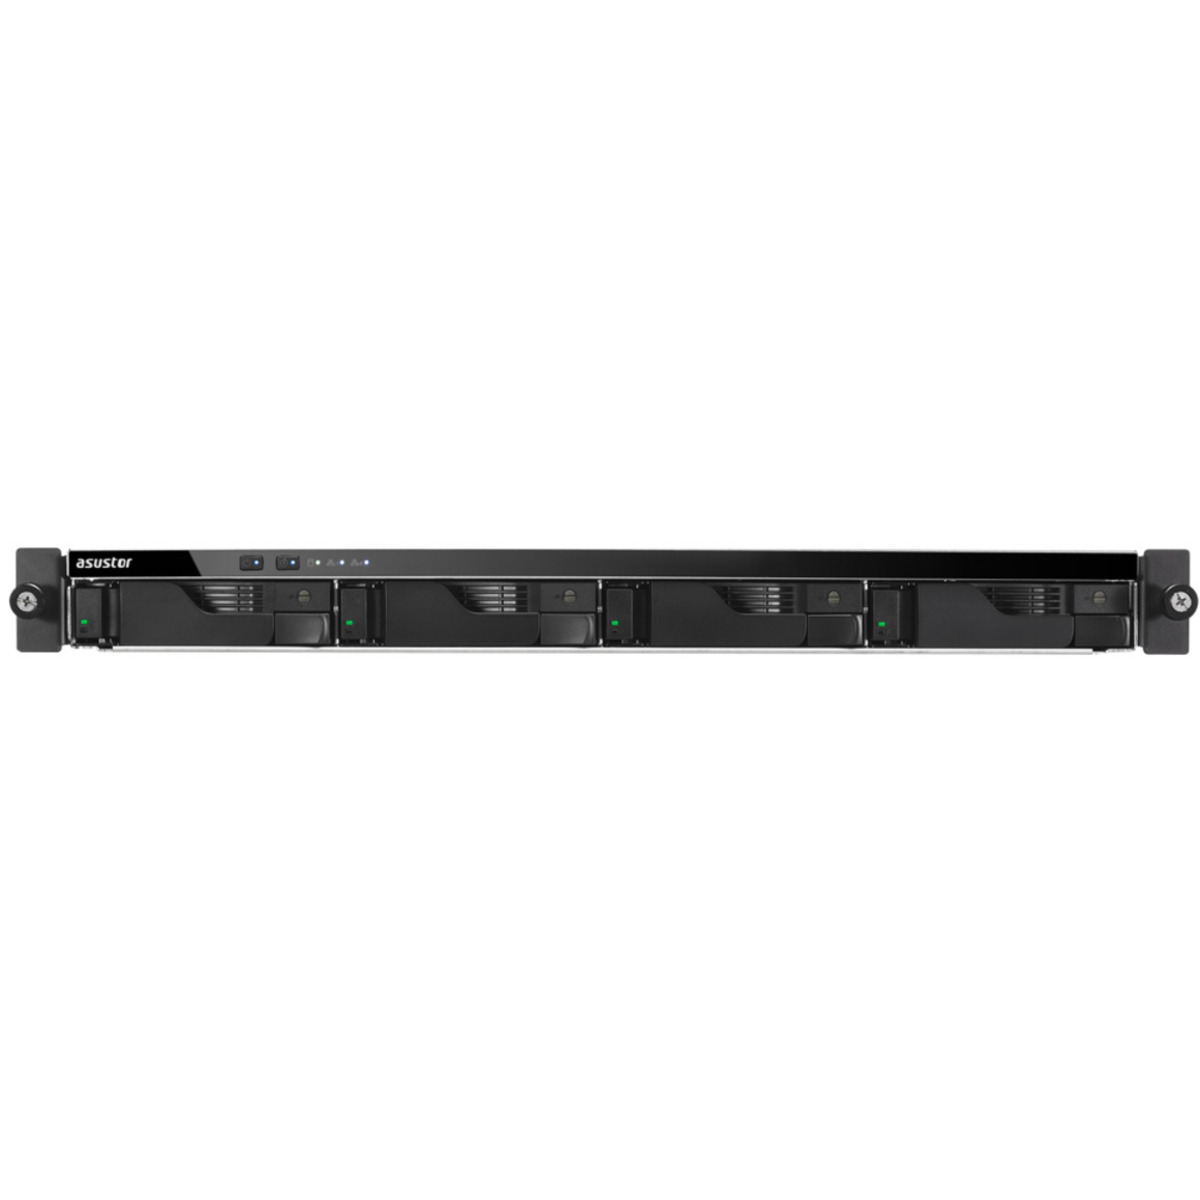 ASUSTOR LOCKERSTOR 4RD AS6504RD 36tb 4-Bay RackMount Multimedia / Power User / Business NAS - Network Attached Storage Device 3x12tb Western Digital Red Plus WD120EFBX 3.5 7200rpm SATA 6Gb/s HDD NAS Class Drives Installed - Burn-In Tested - FREE RAM UPGRADE LOCKERSTOR 4RD AS6504RD